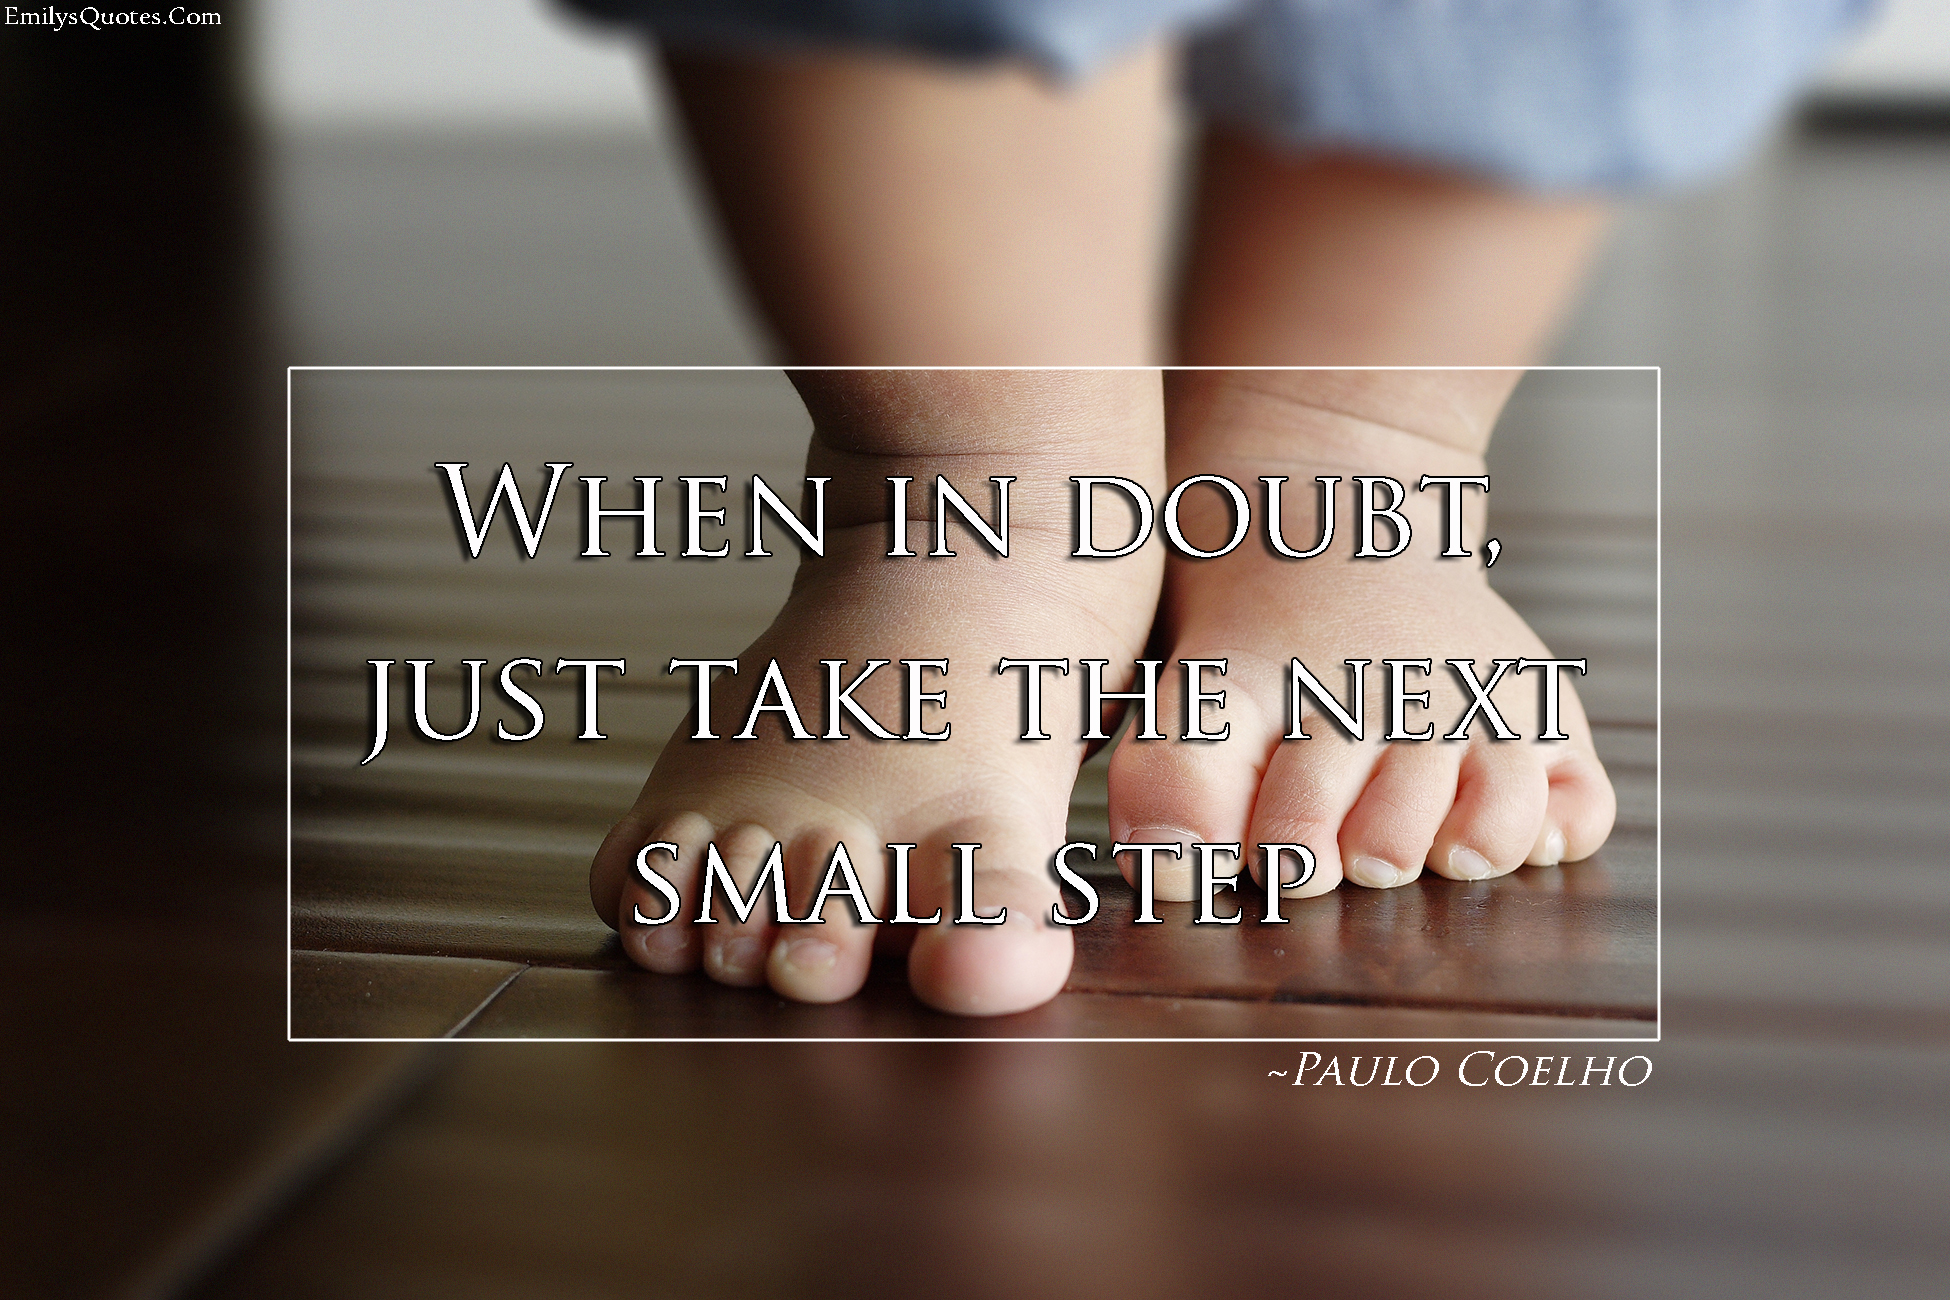 When in doubt, just take the next small step | Popular inspirational